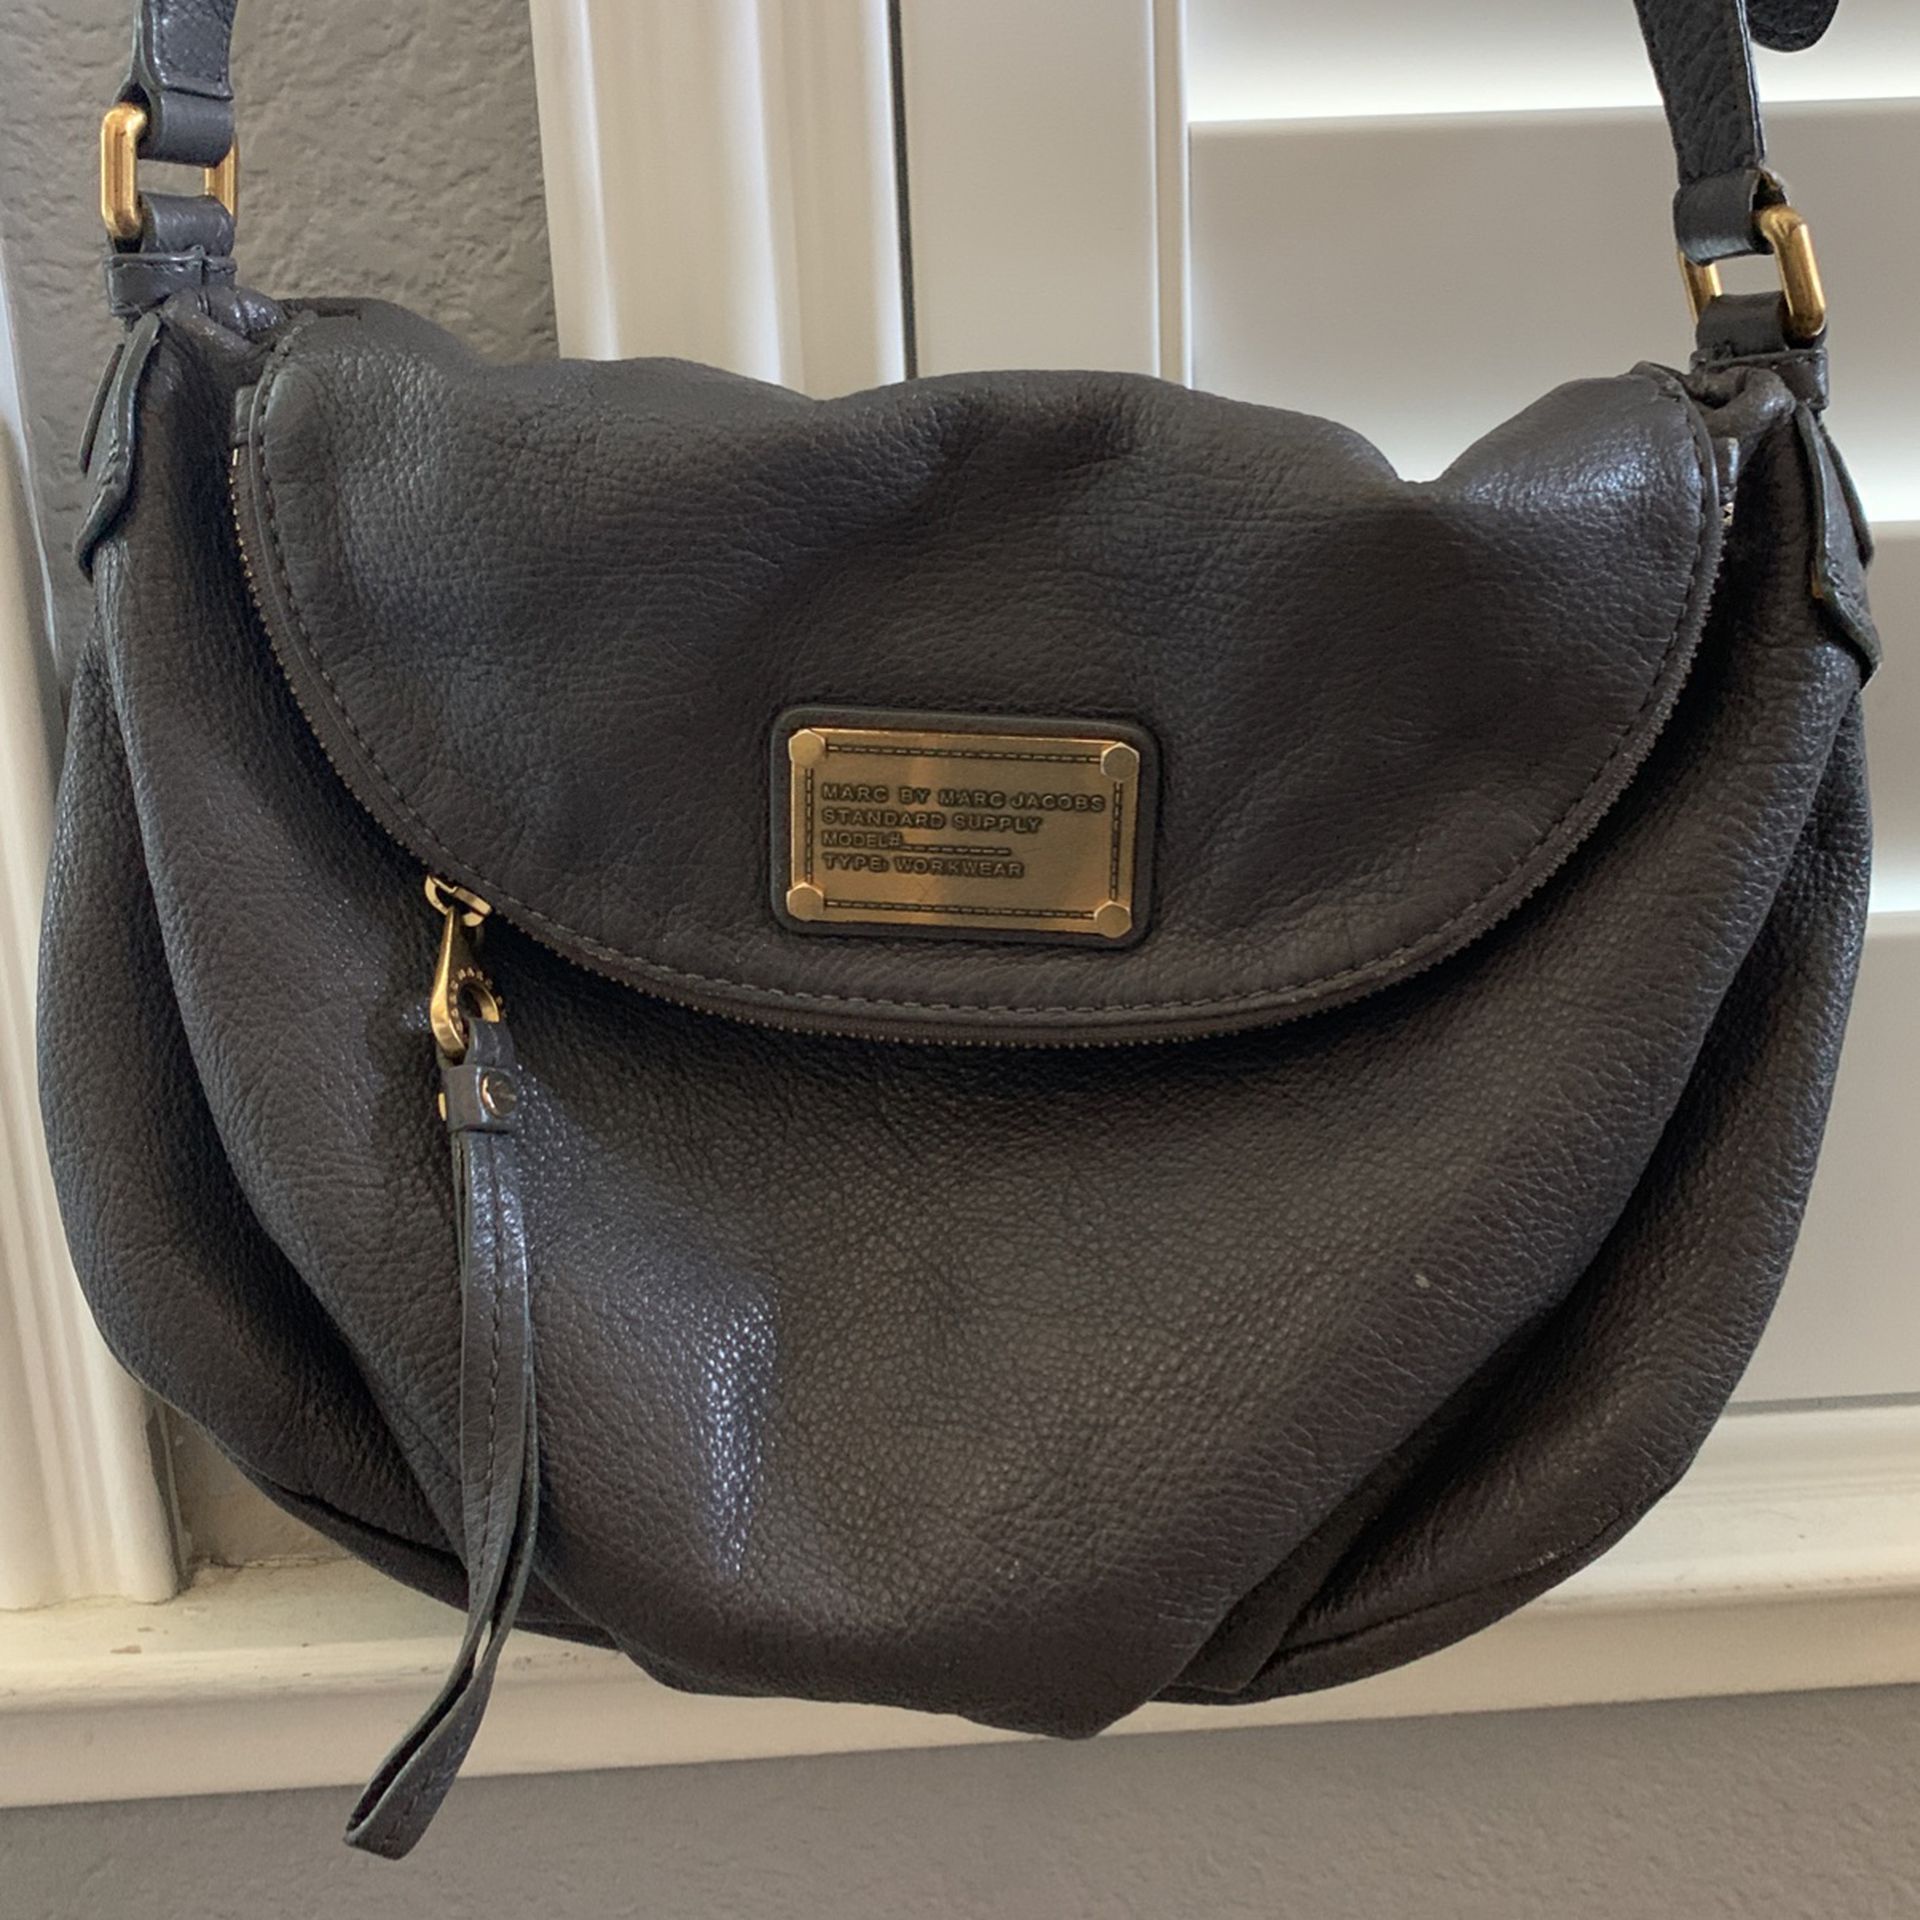 Gray Leather Marc By Marc Jacobs Purse Shoulder Bag 